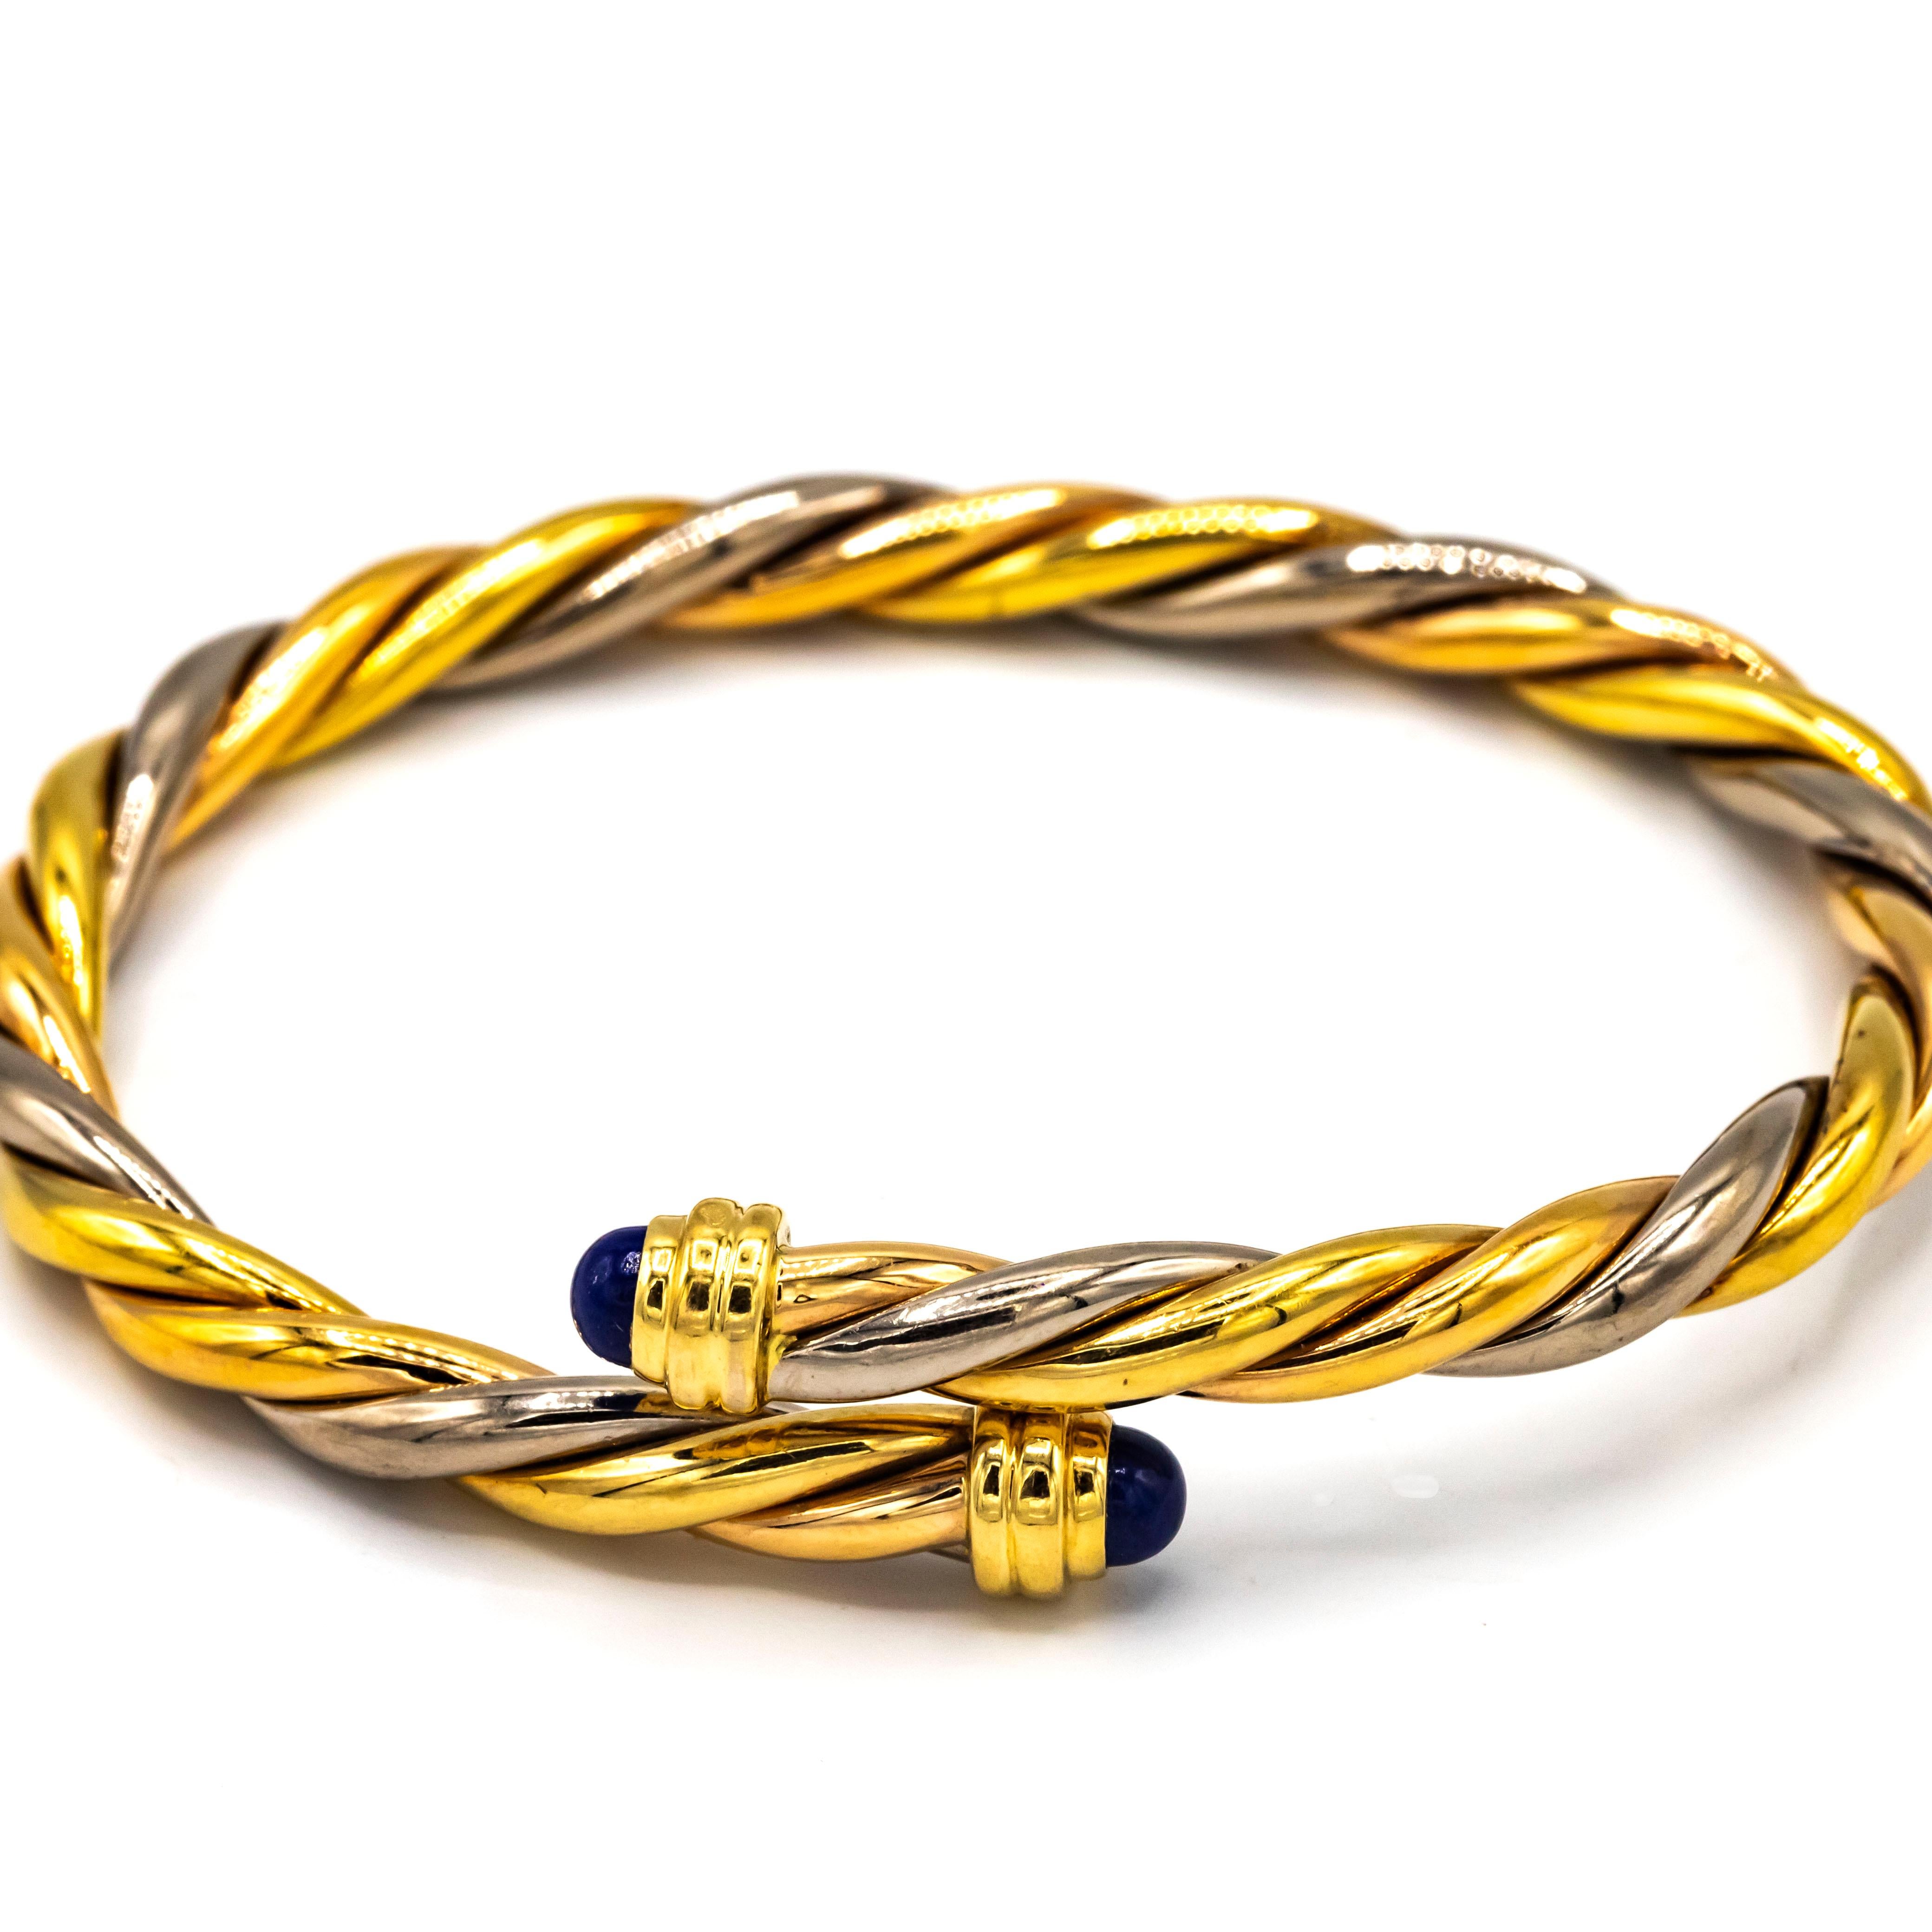 Cartier tricolor 18K gold lapis lazuli twisted bypass cuff bangle bracelet featuring two round cabochon lapis lazuli gemstone end caps. The total net weight is approximately 25 g. (The Cartier box and papers are not included.) 

Measurements: Inside